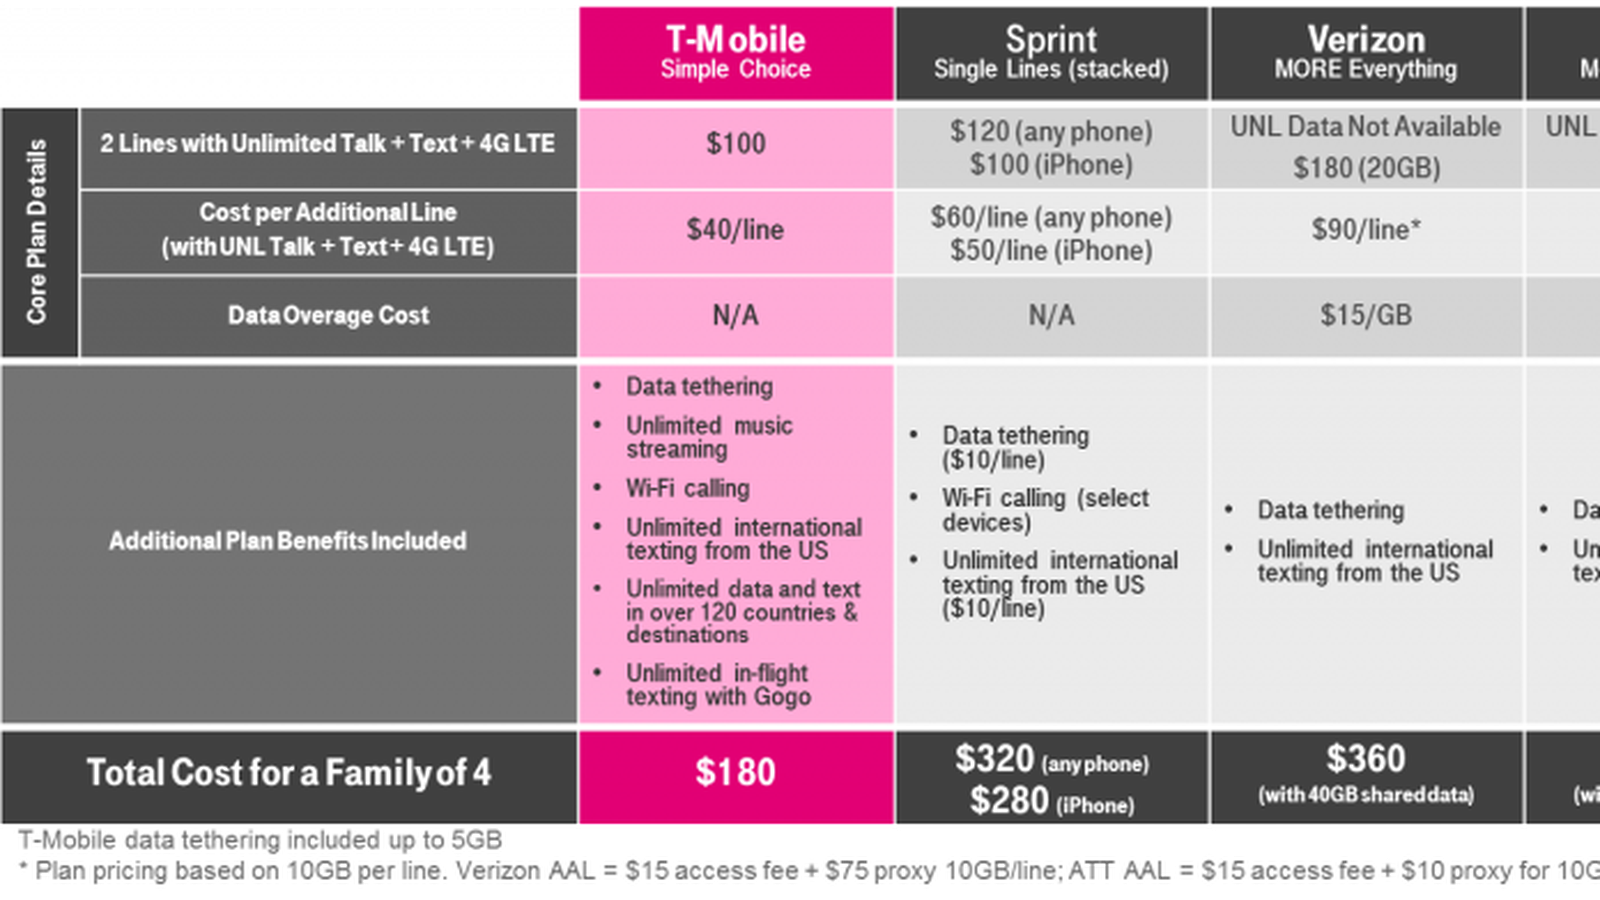 T Mobile Announces New Unlimited 4g Lte Data Plan With 2 Lines For